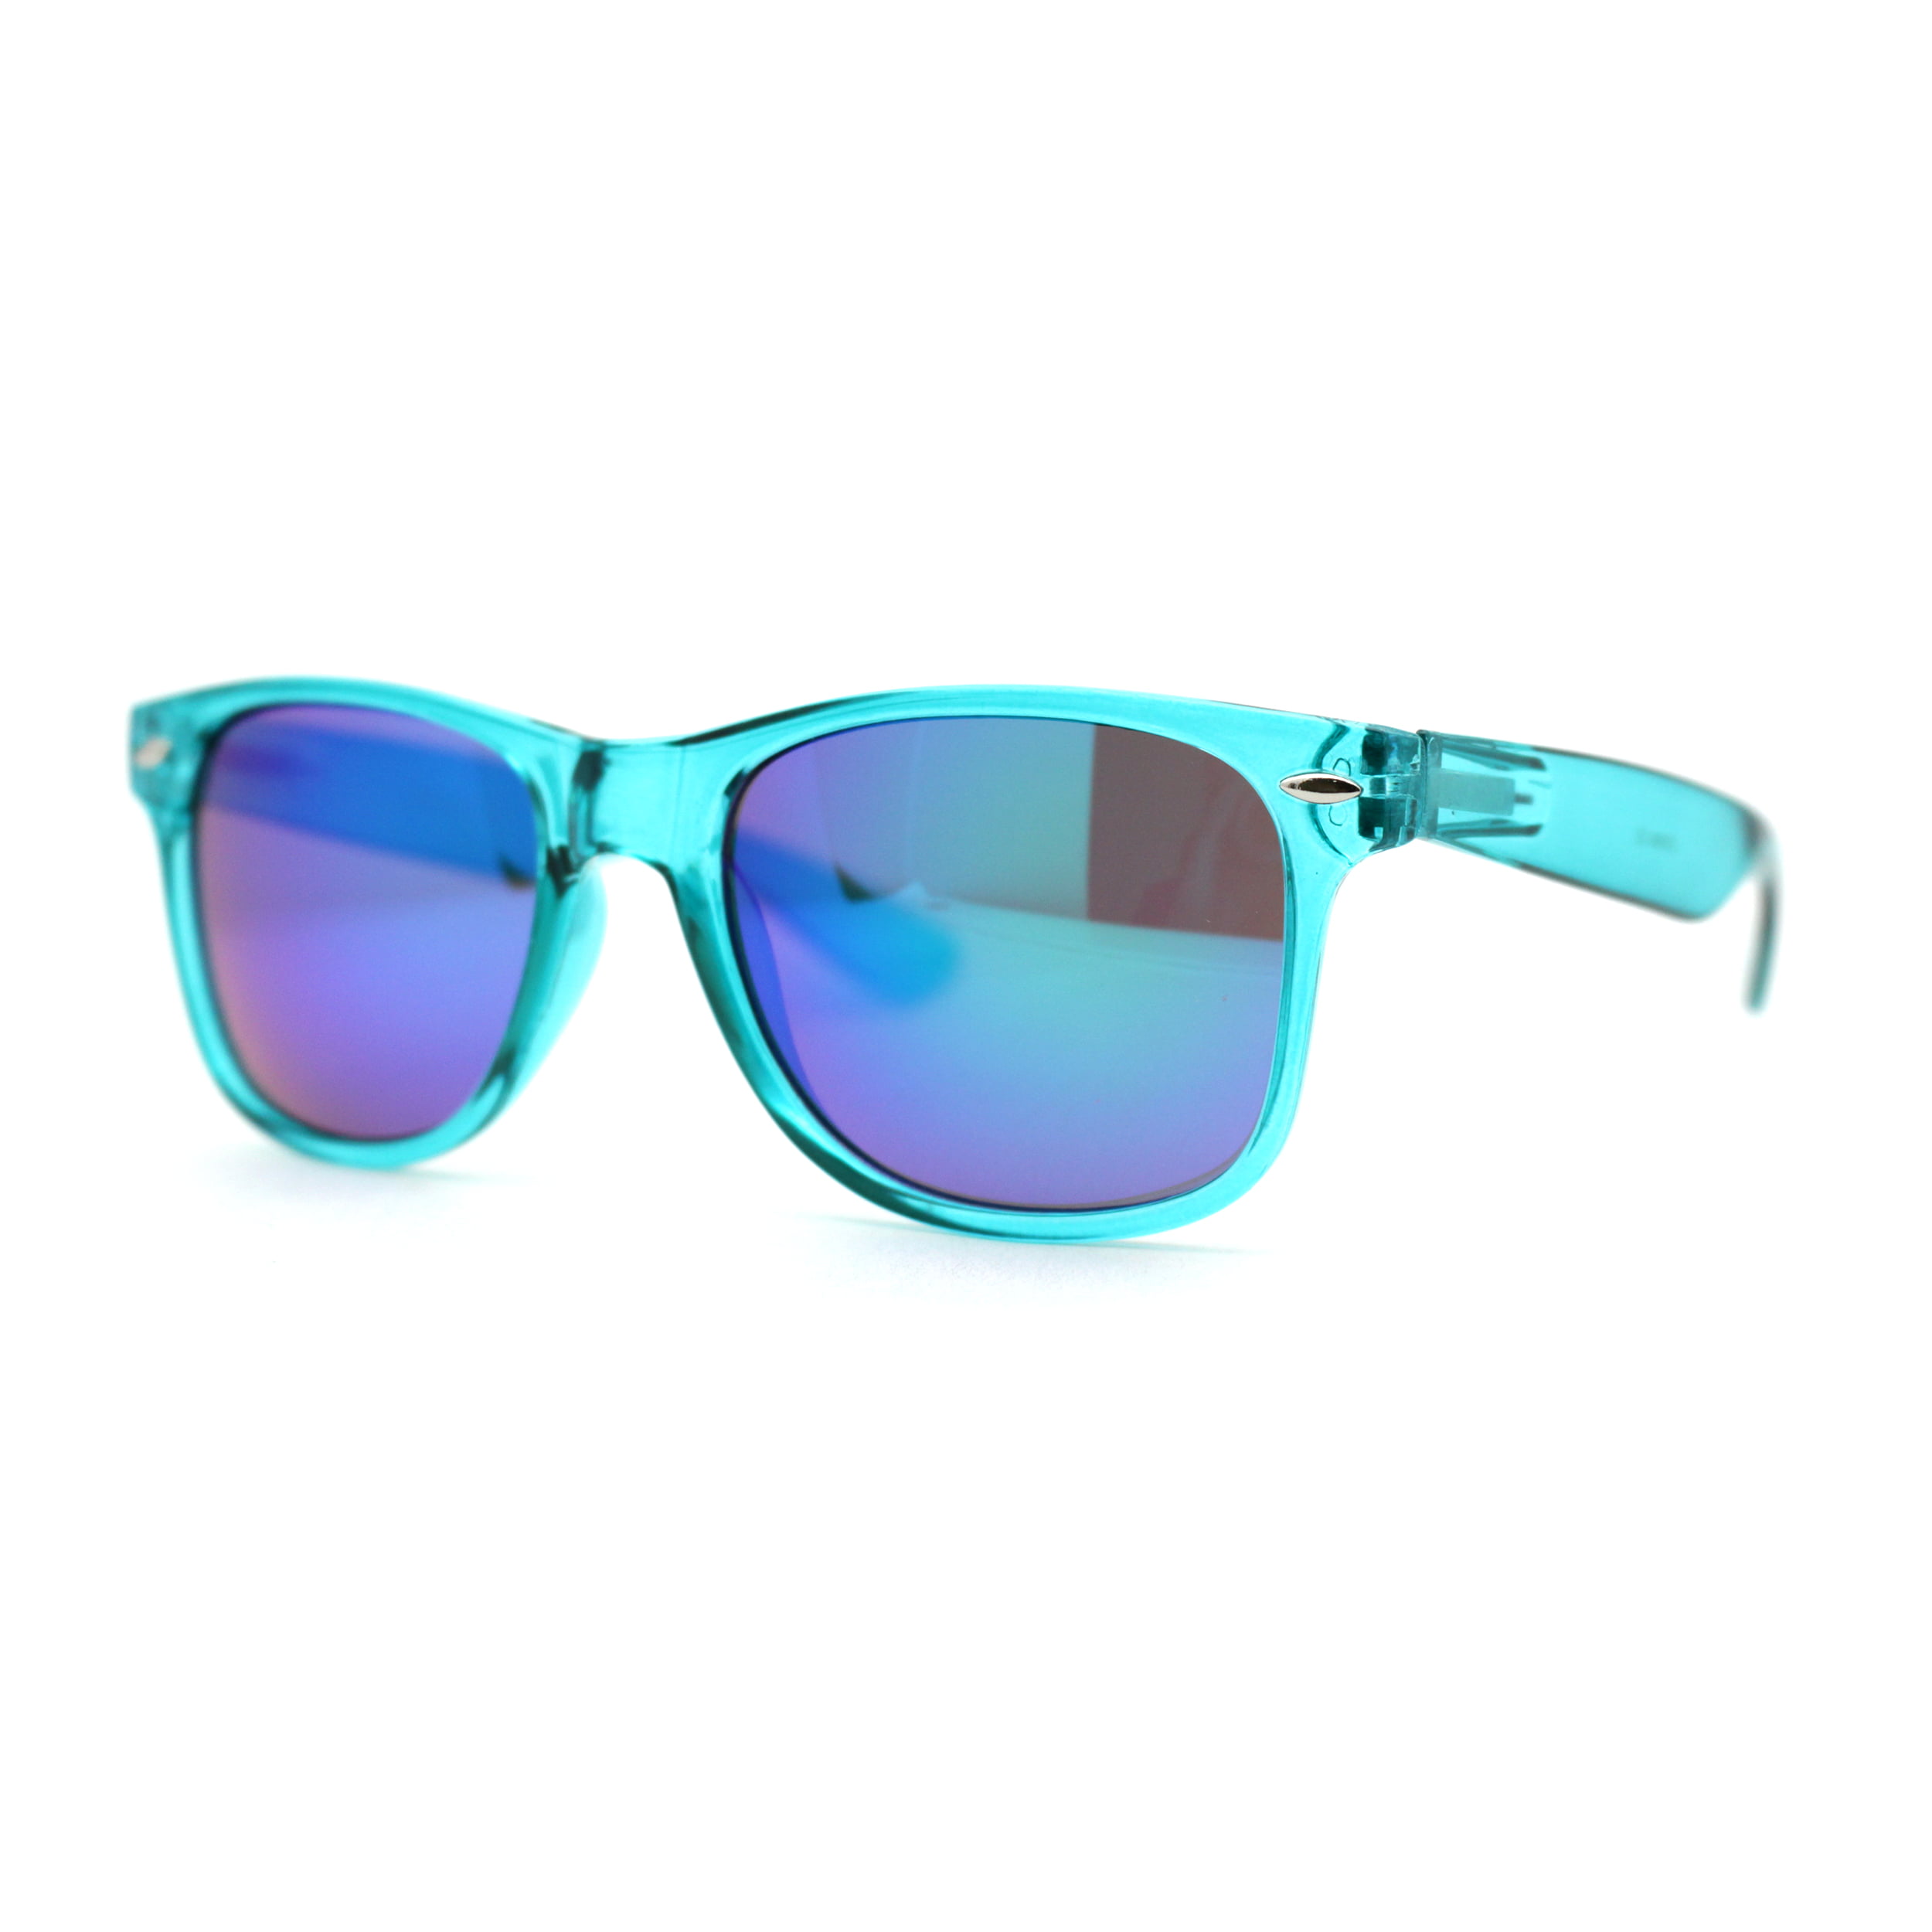 Spring Loaded Hinge Arm Pop Color Rectangle Dad Shade Sunglasses